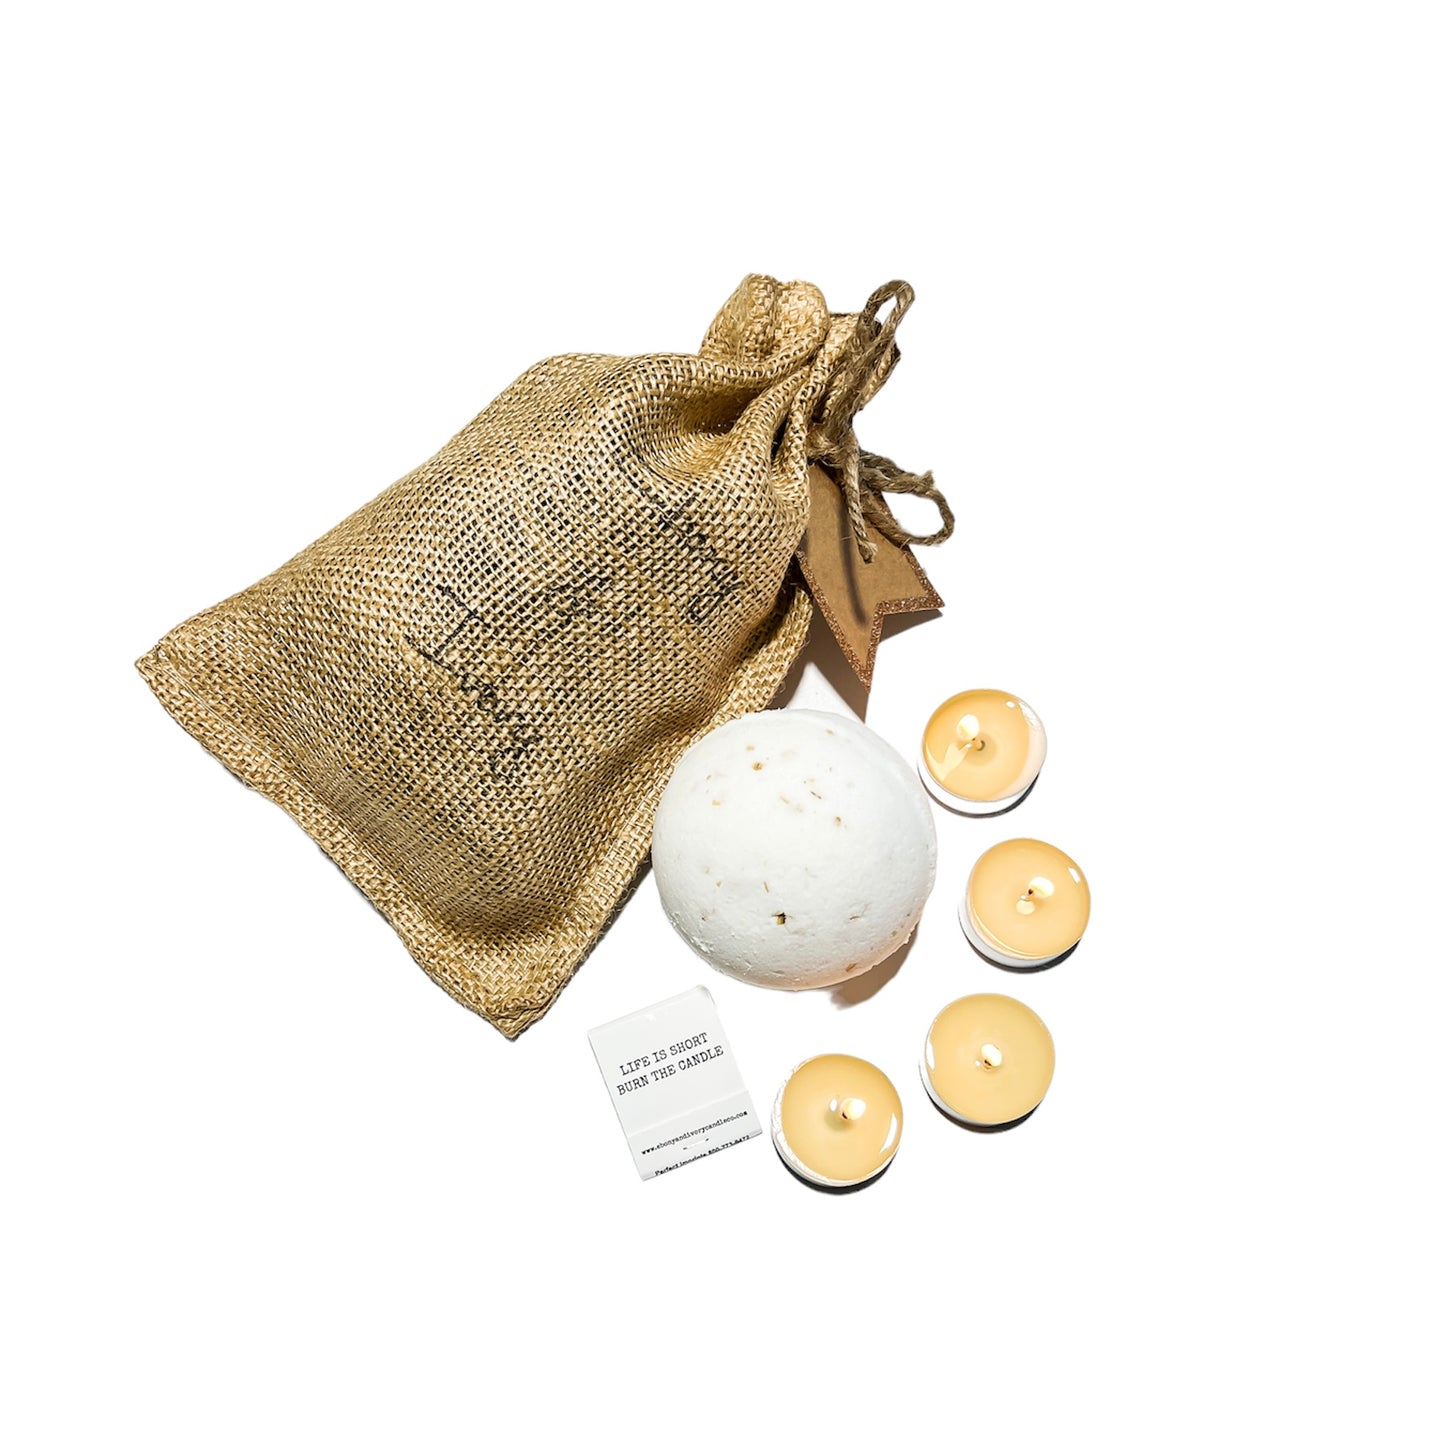 Burlap bag with an oud, bergamot, and citrus scented bath bomb and four tealights.